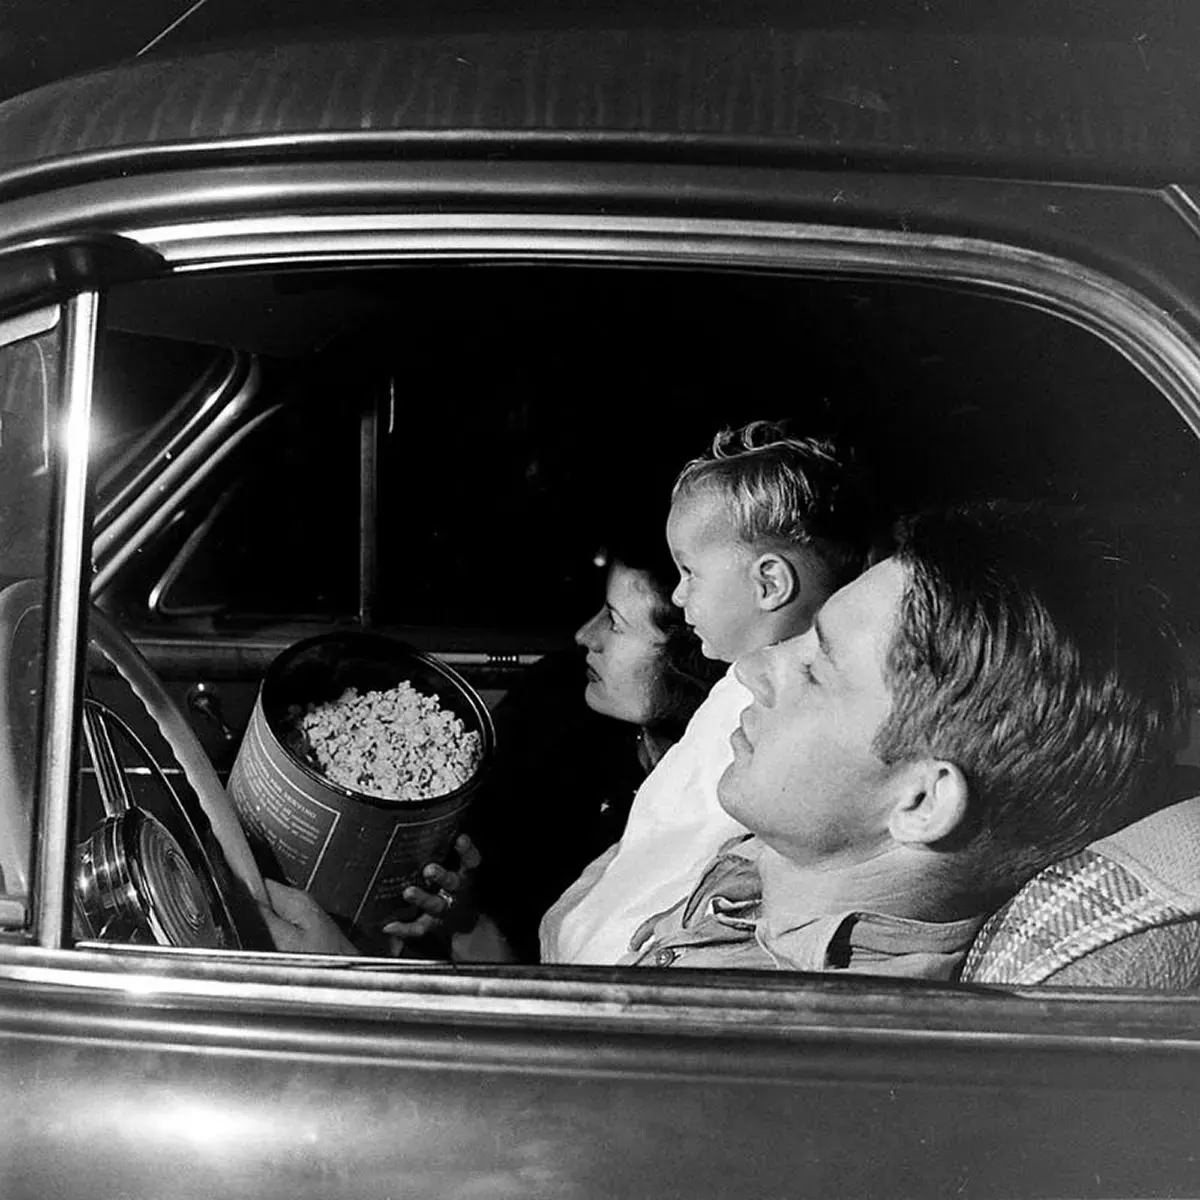 A late night at the drive-in, a couple and their young son watch a film while they sit in their ’41 Buick coupe, with almost an equally large canister of popcorn.